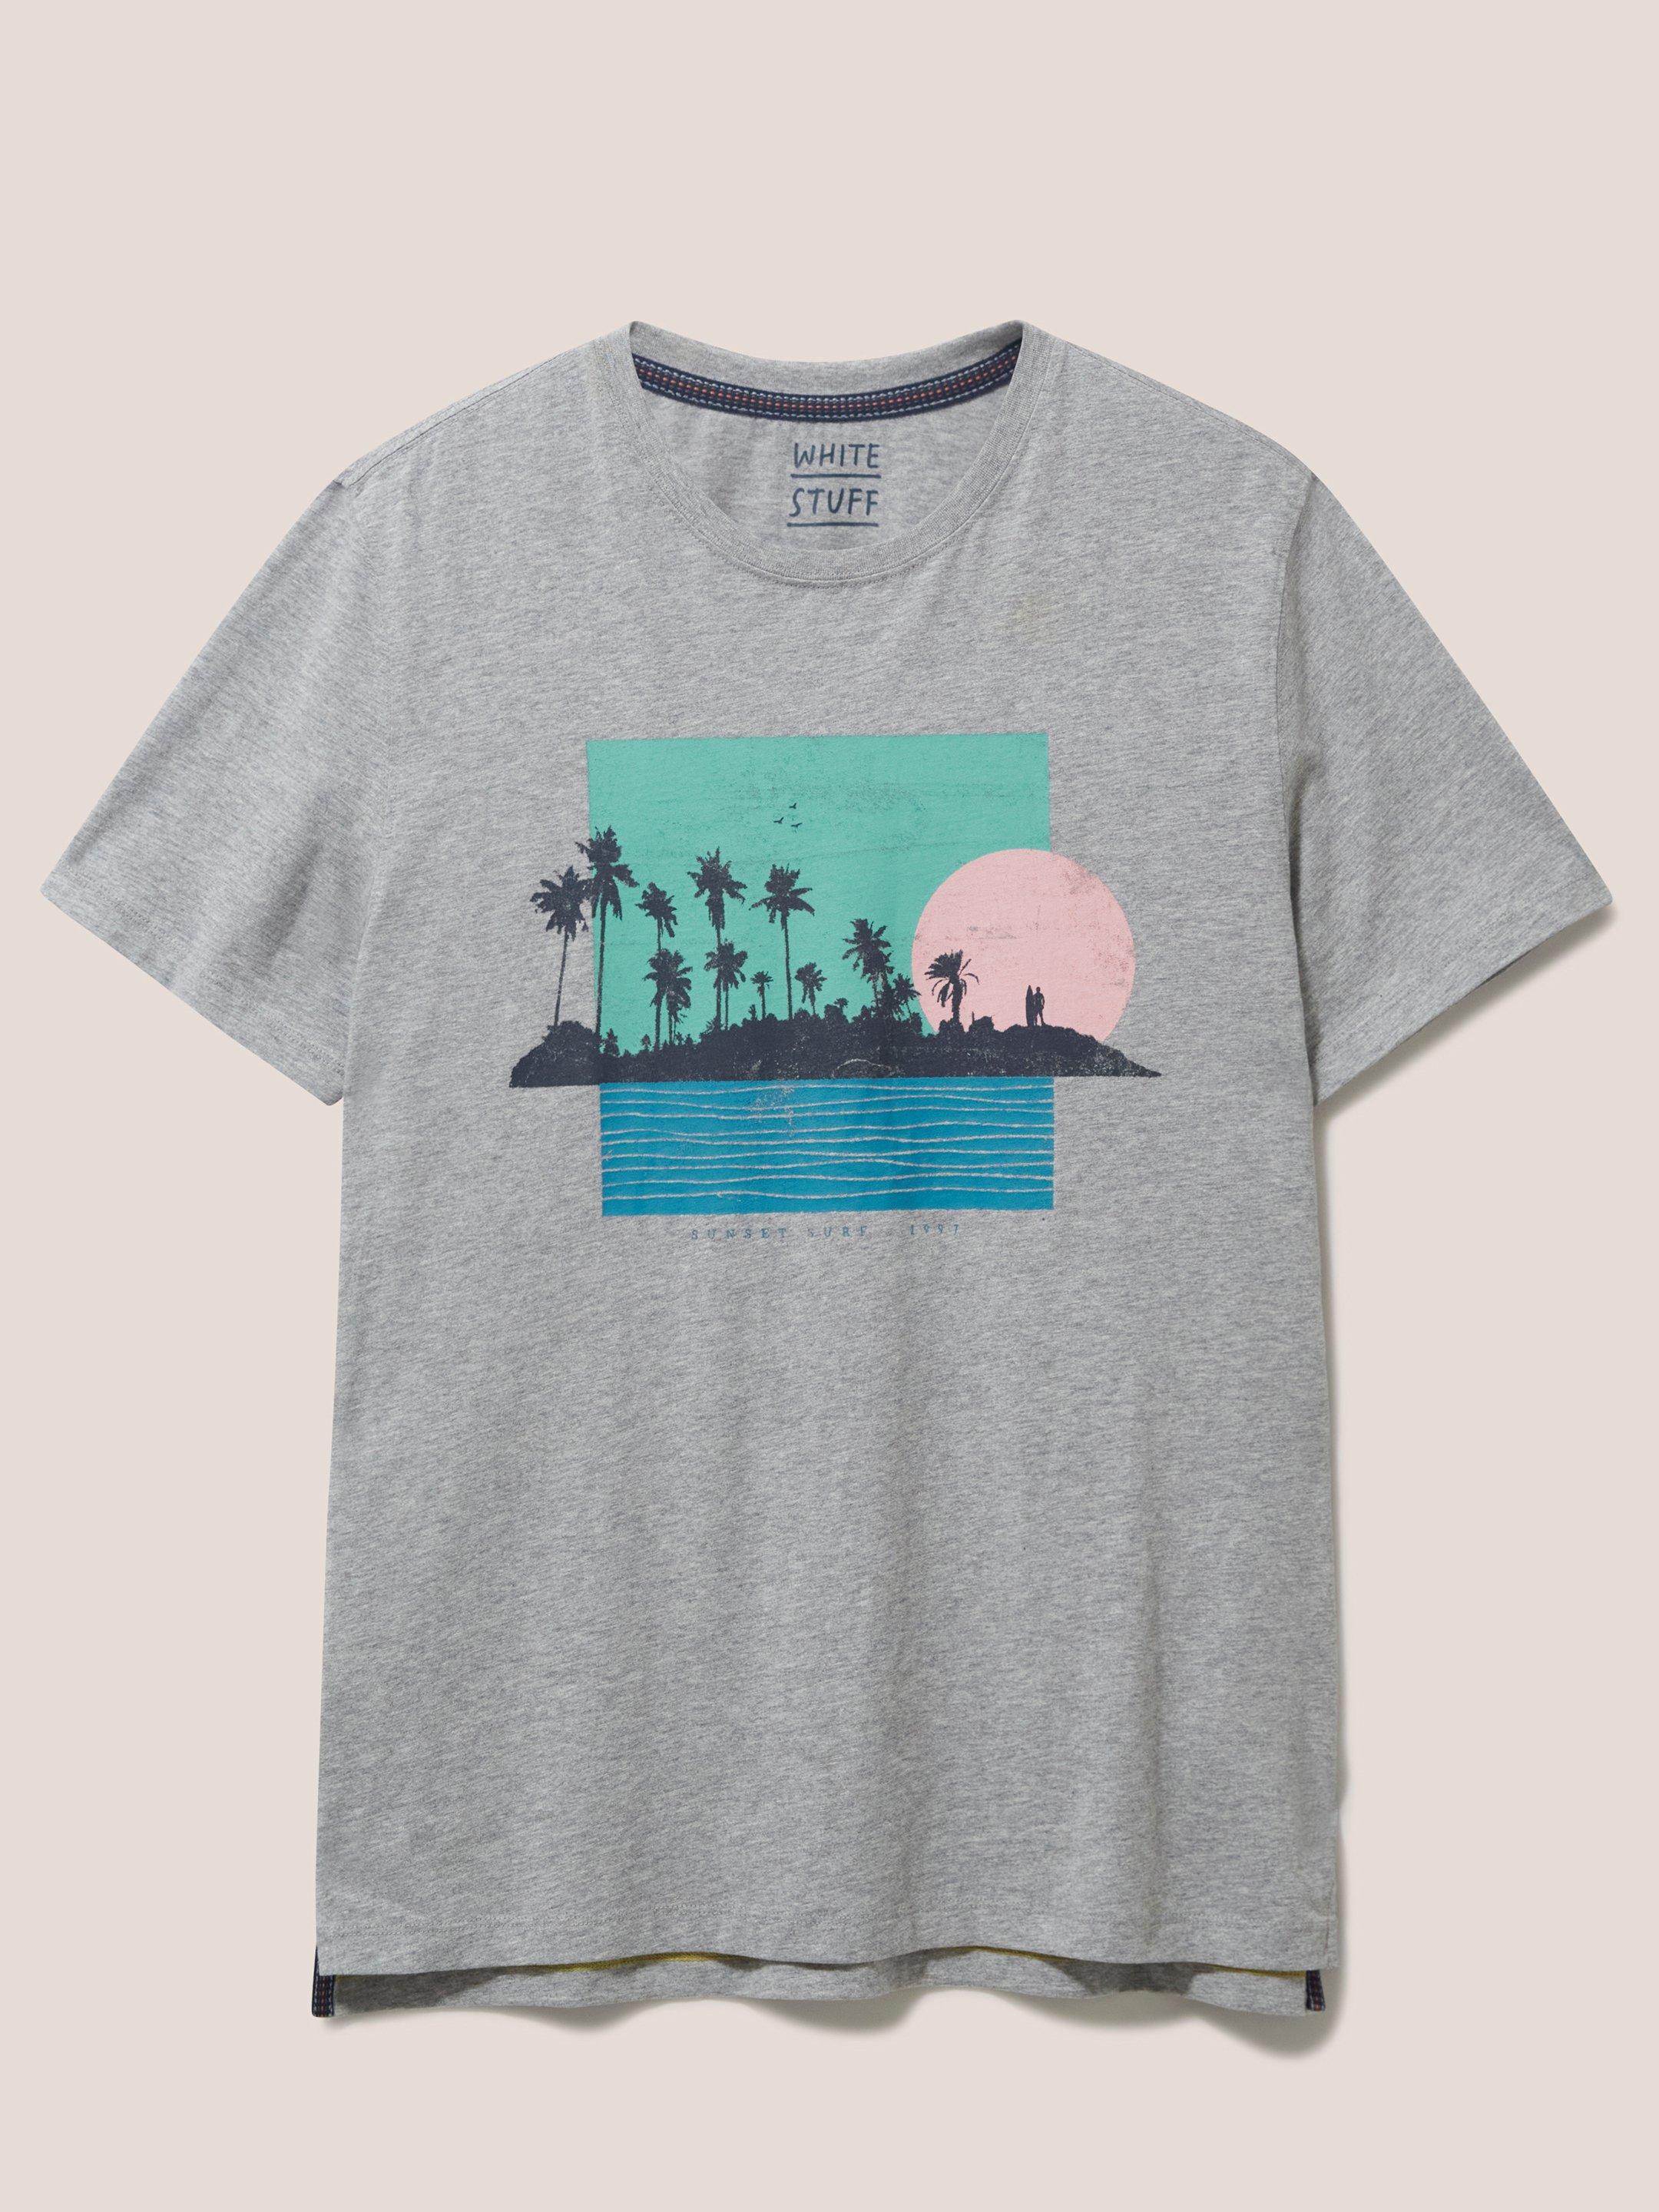 Sunset Surf Graphic Tee in GREY MARL - FLAT FRONT